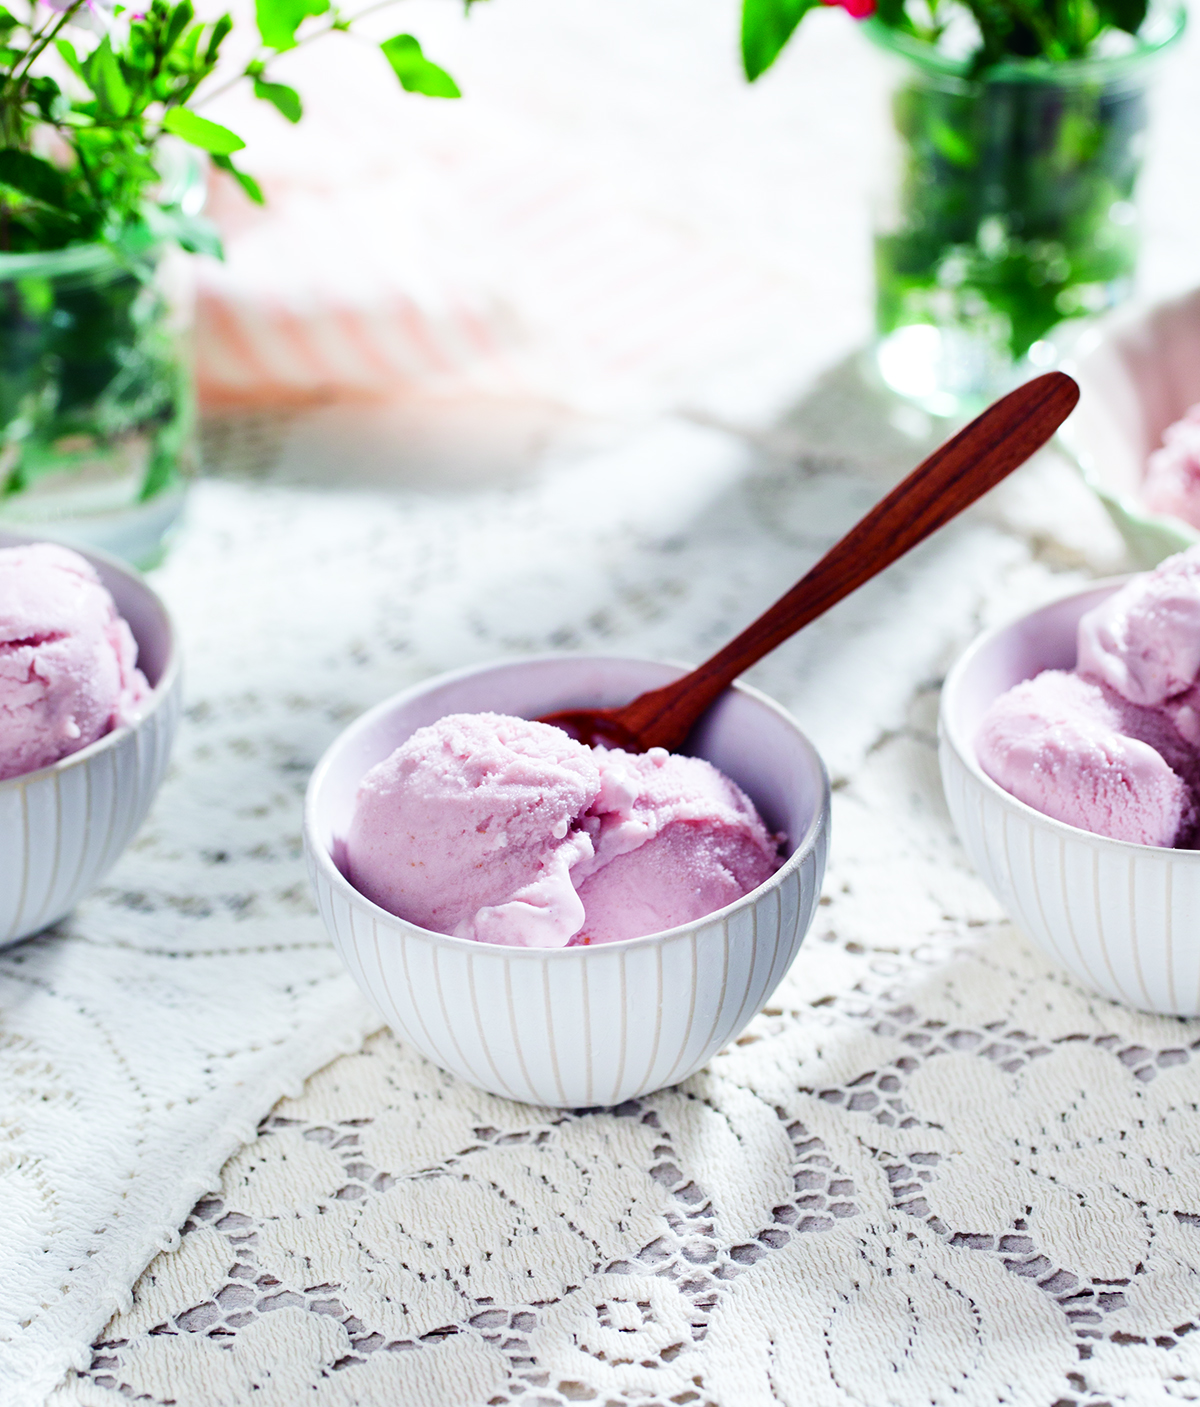 Celebrate Midsummer by making this delicious homemade strawberry ice cream.